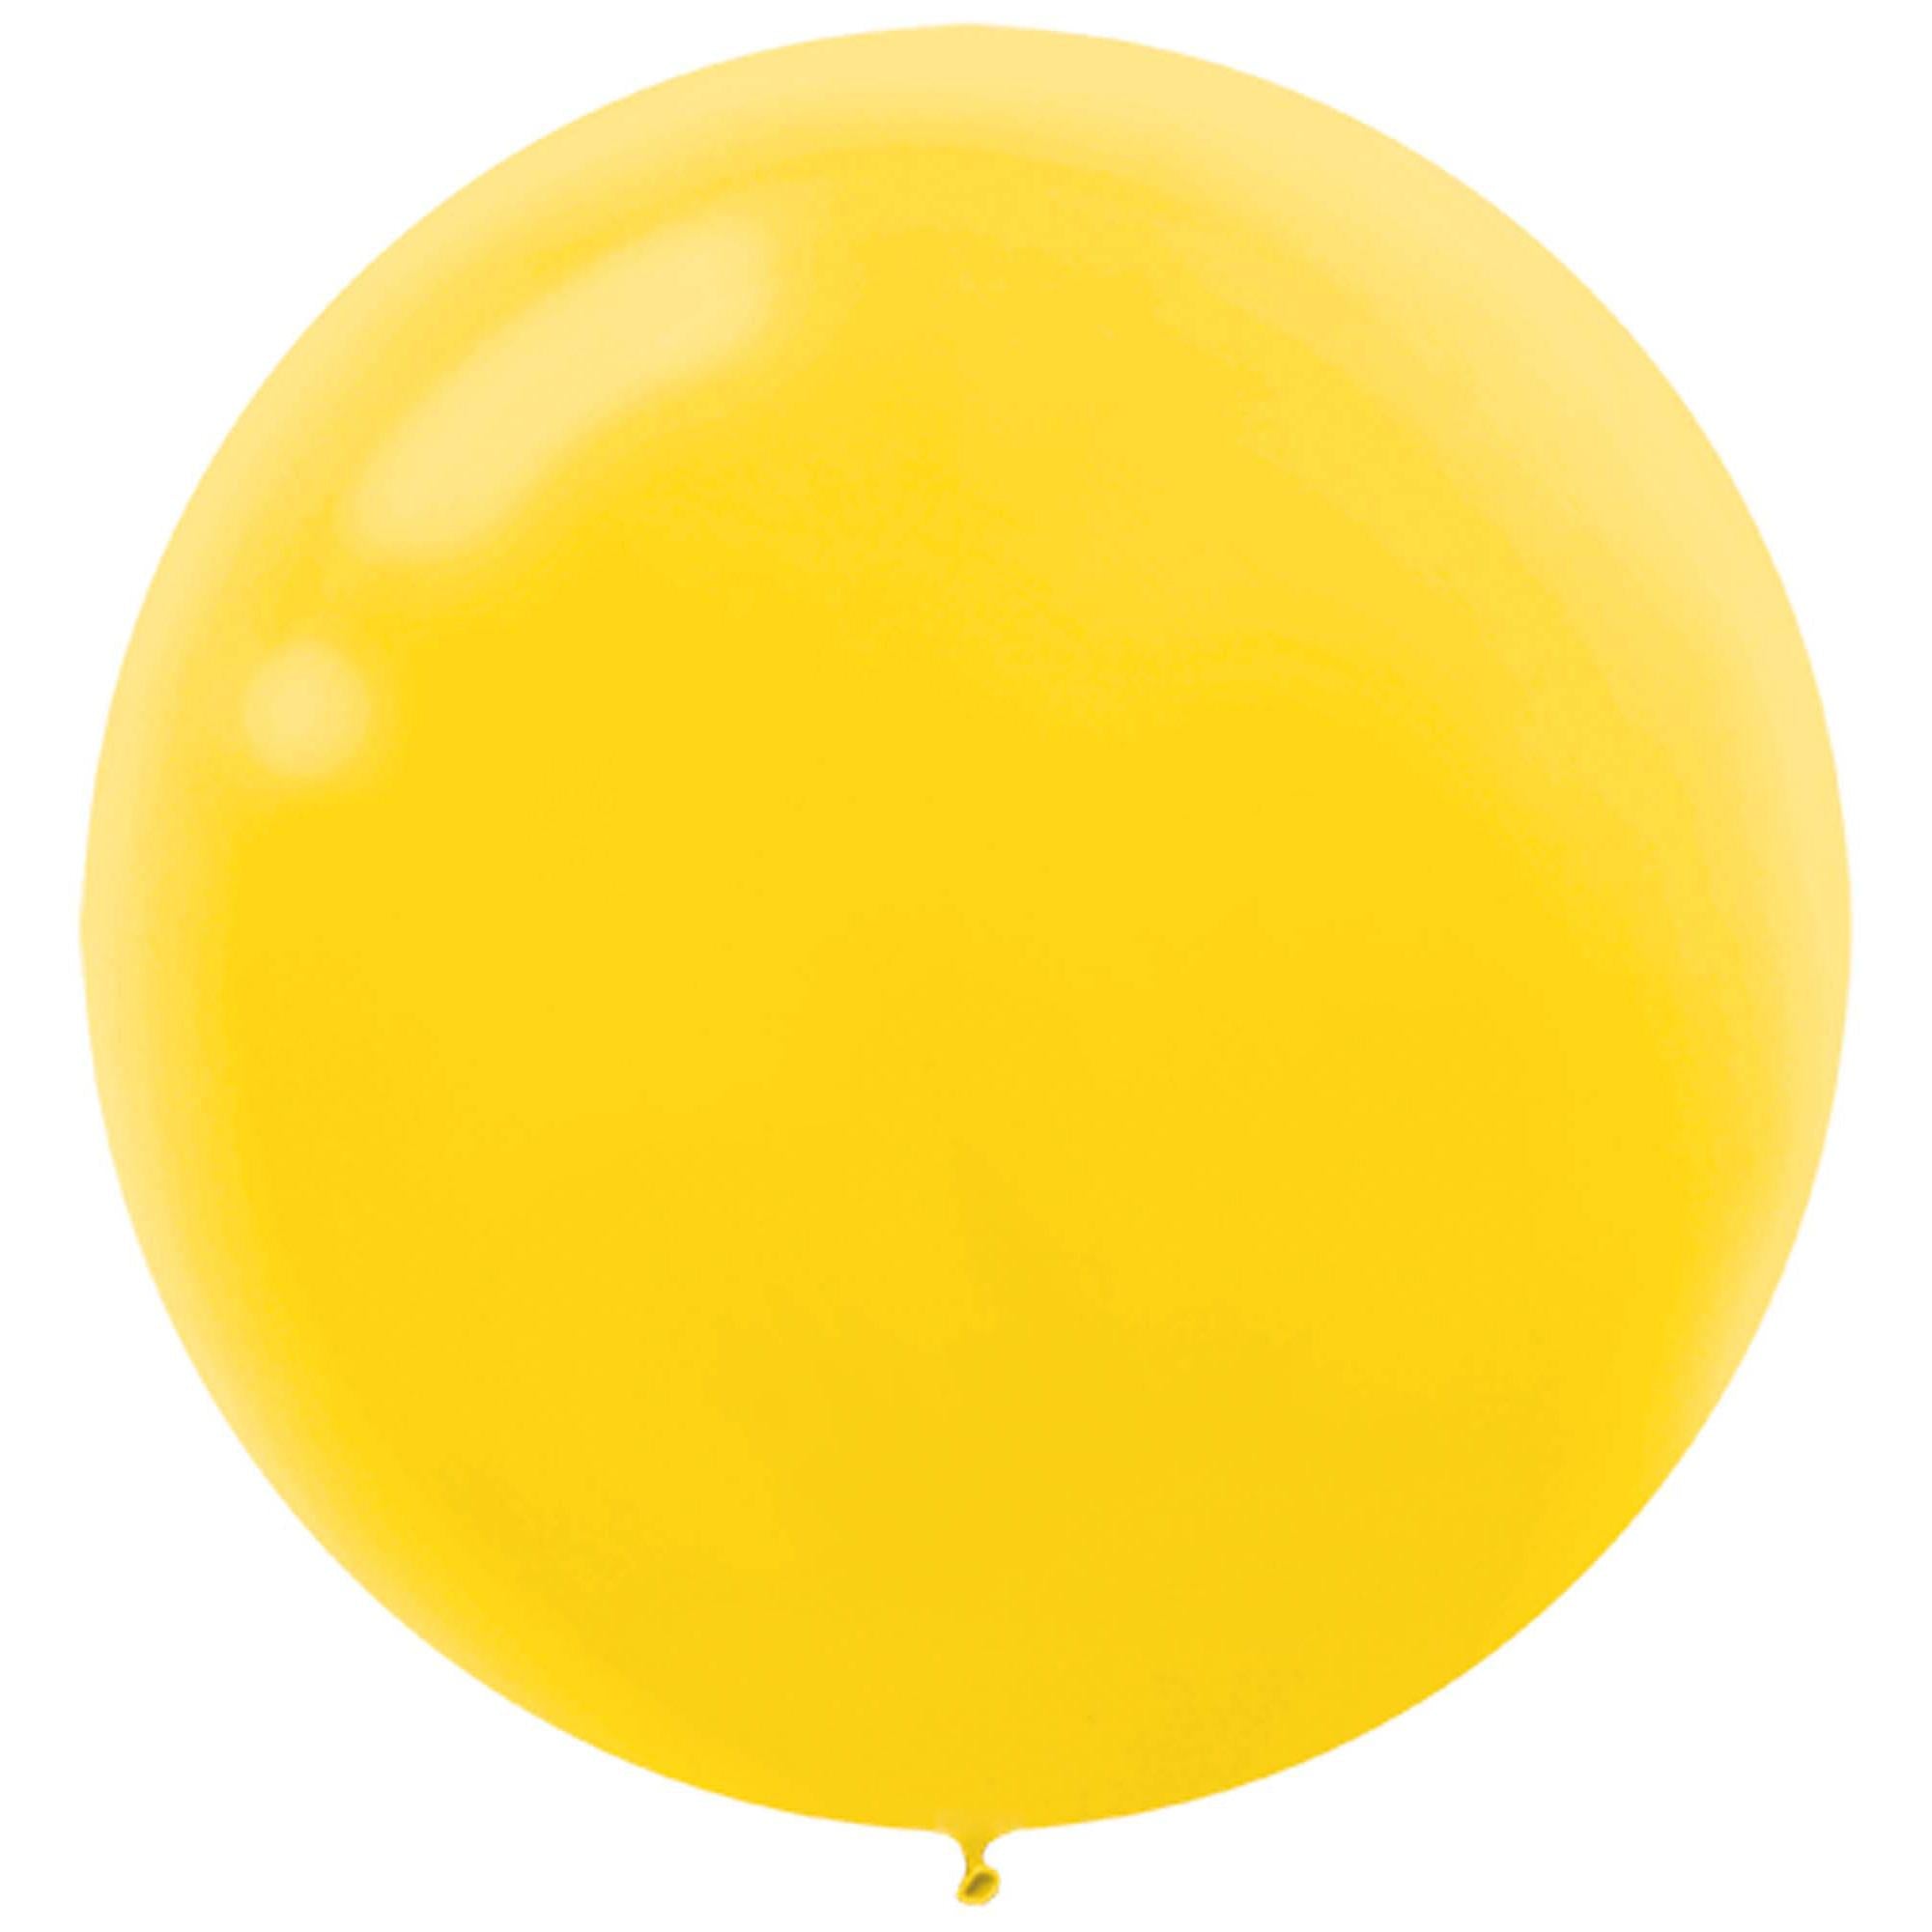 Yellow Sunshine Latex Balloon 24in, 4pcs Balloons & Streamers - Party Centre